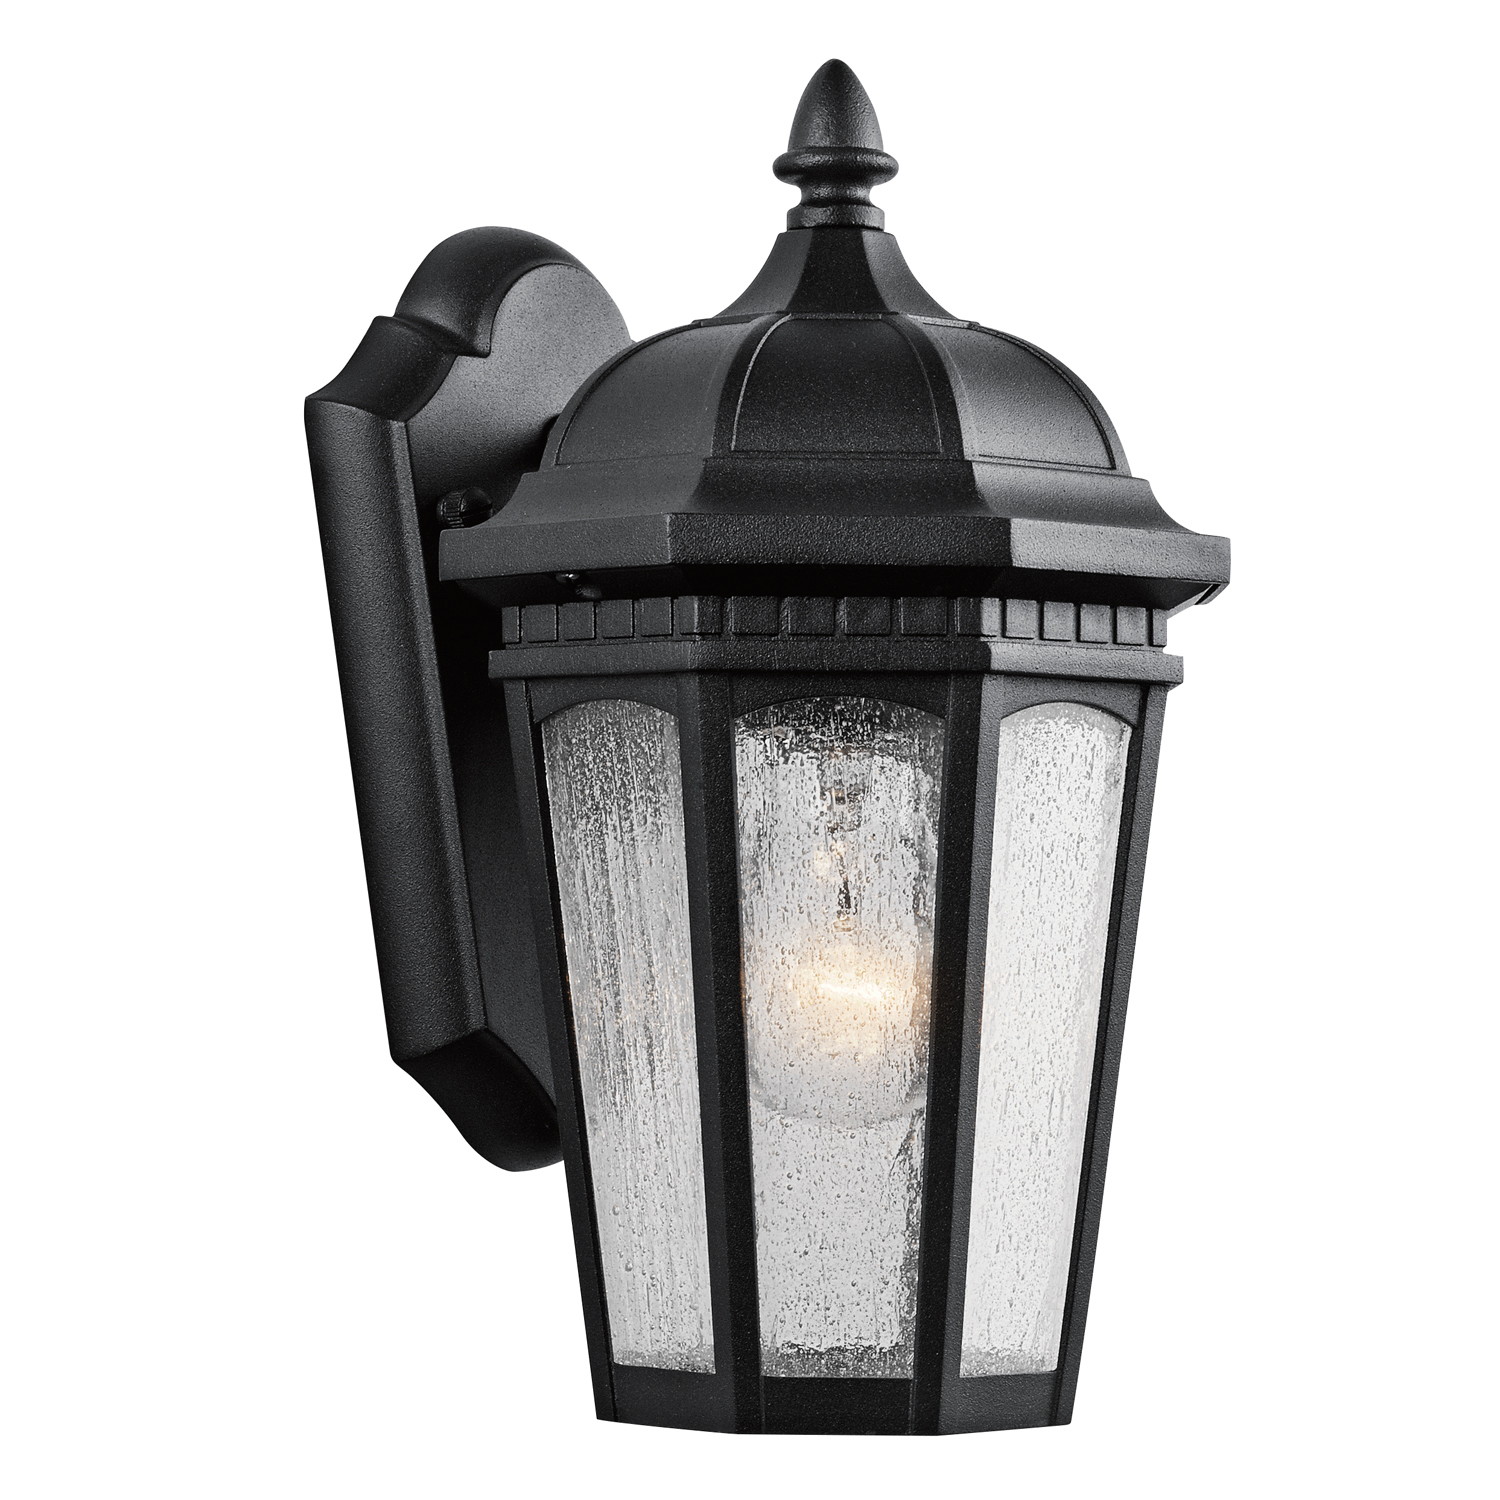 Uncluttered and traditional, this 1 light outdoor wall lantern from the Courtyard(TM) collection adds the warmth of a secluded terrace to any patio or porch. Featuring a Textured Black finish and Etched Seedy Glass, this design will elevate and enhance any space.